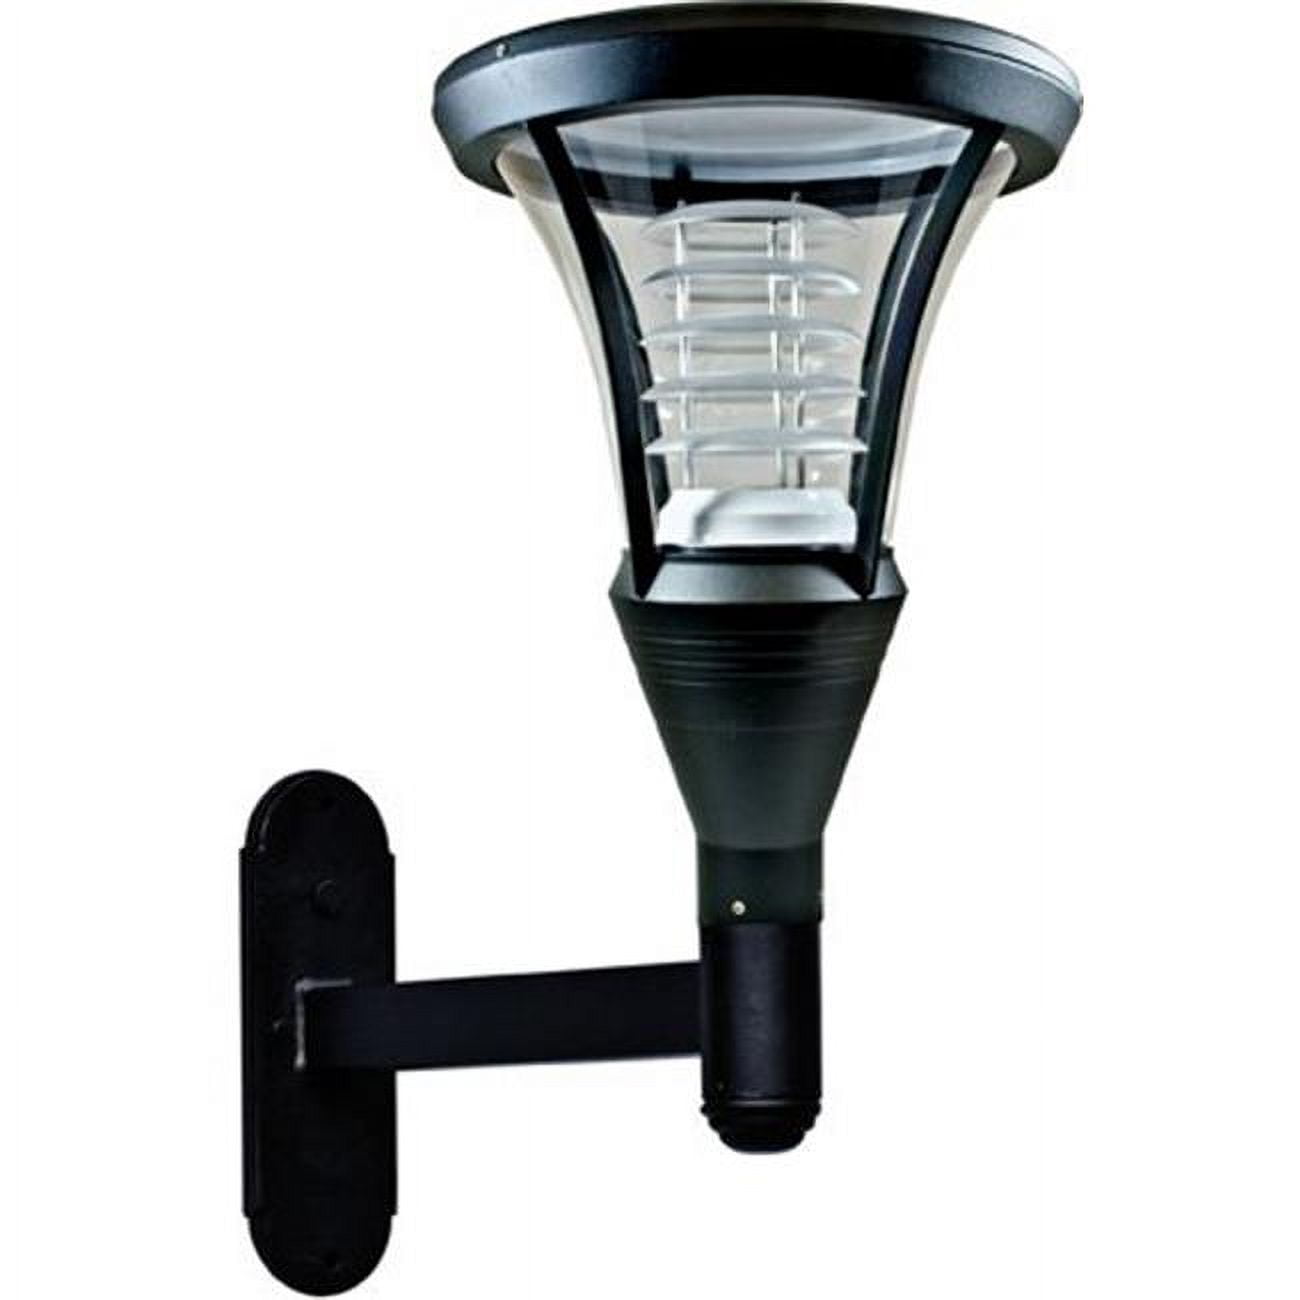 Picture of Dabmar Lighting GM635-B 50W 120V Powder Coated Cast Aluminum Wall Light Fixture with Metal Halide Lamp, Black